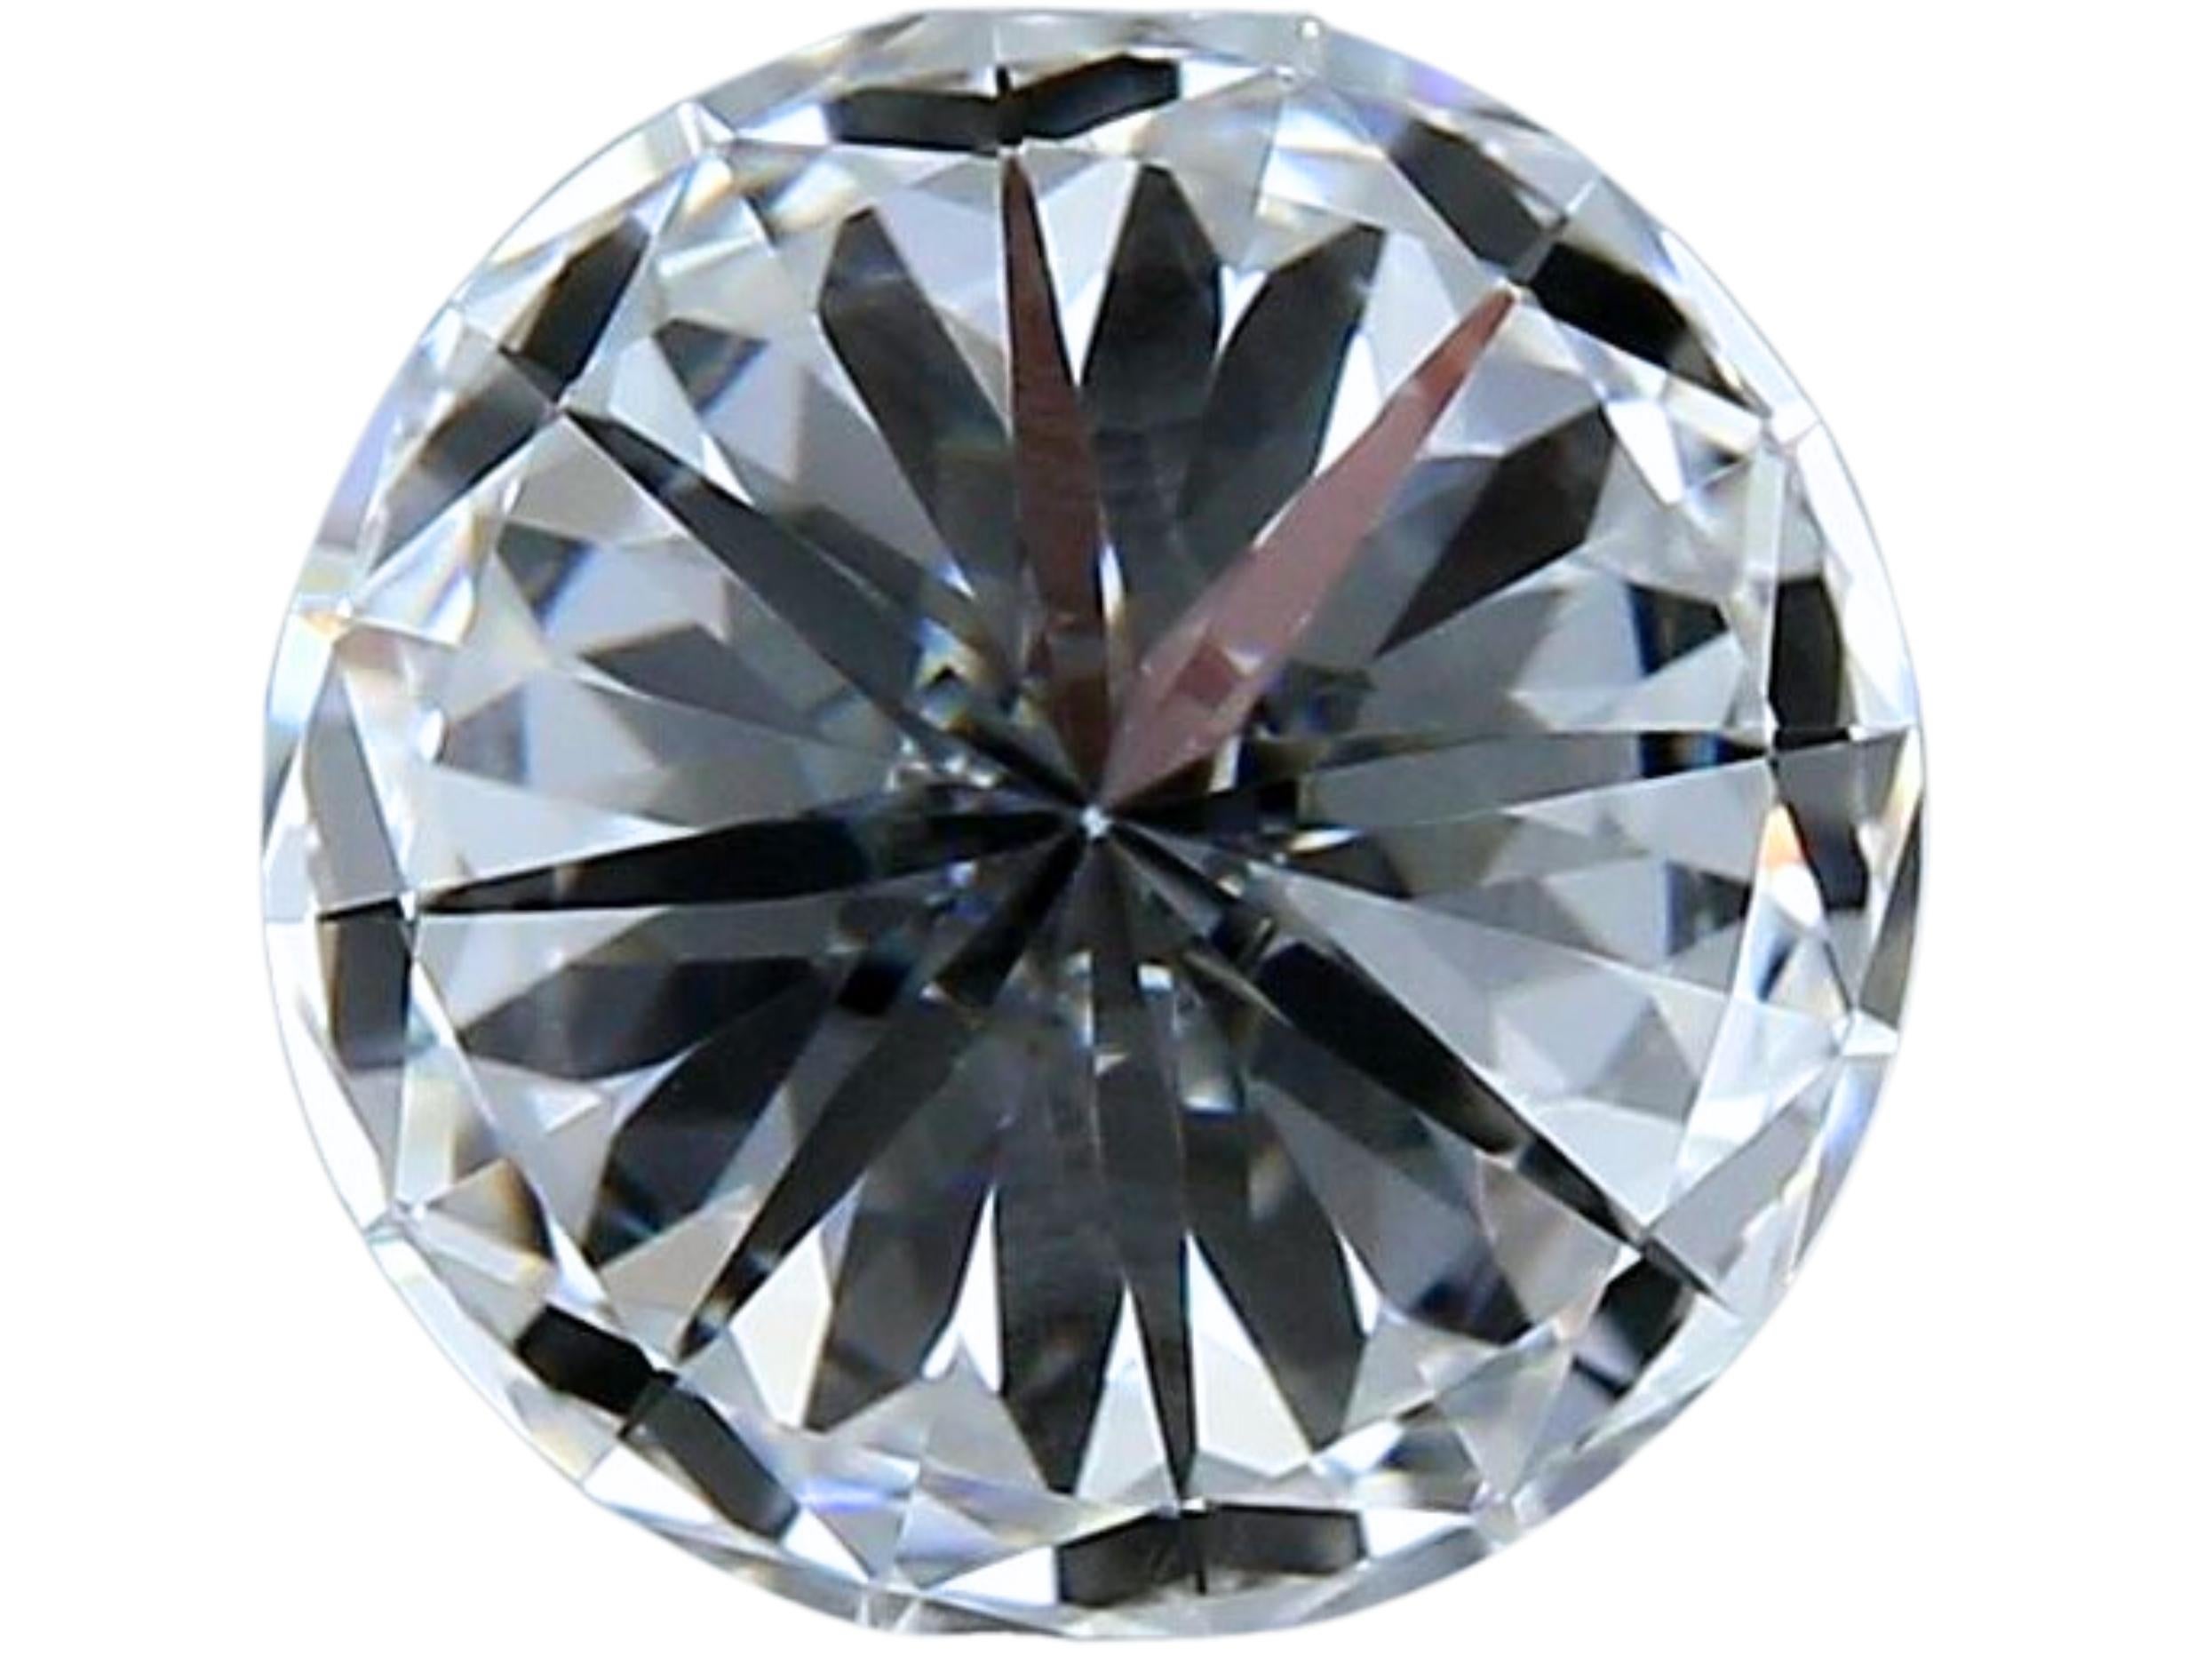 Women's 1pc Glamorous Natural cut Round diamond in a .61 carat  For Sale